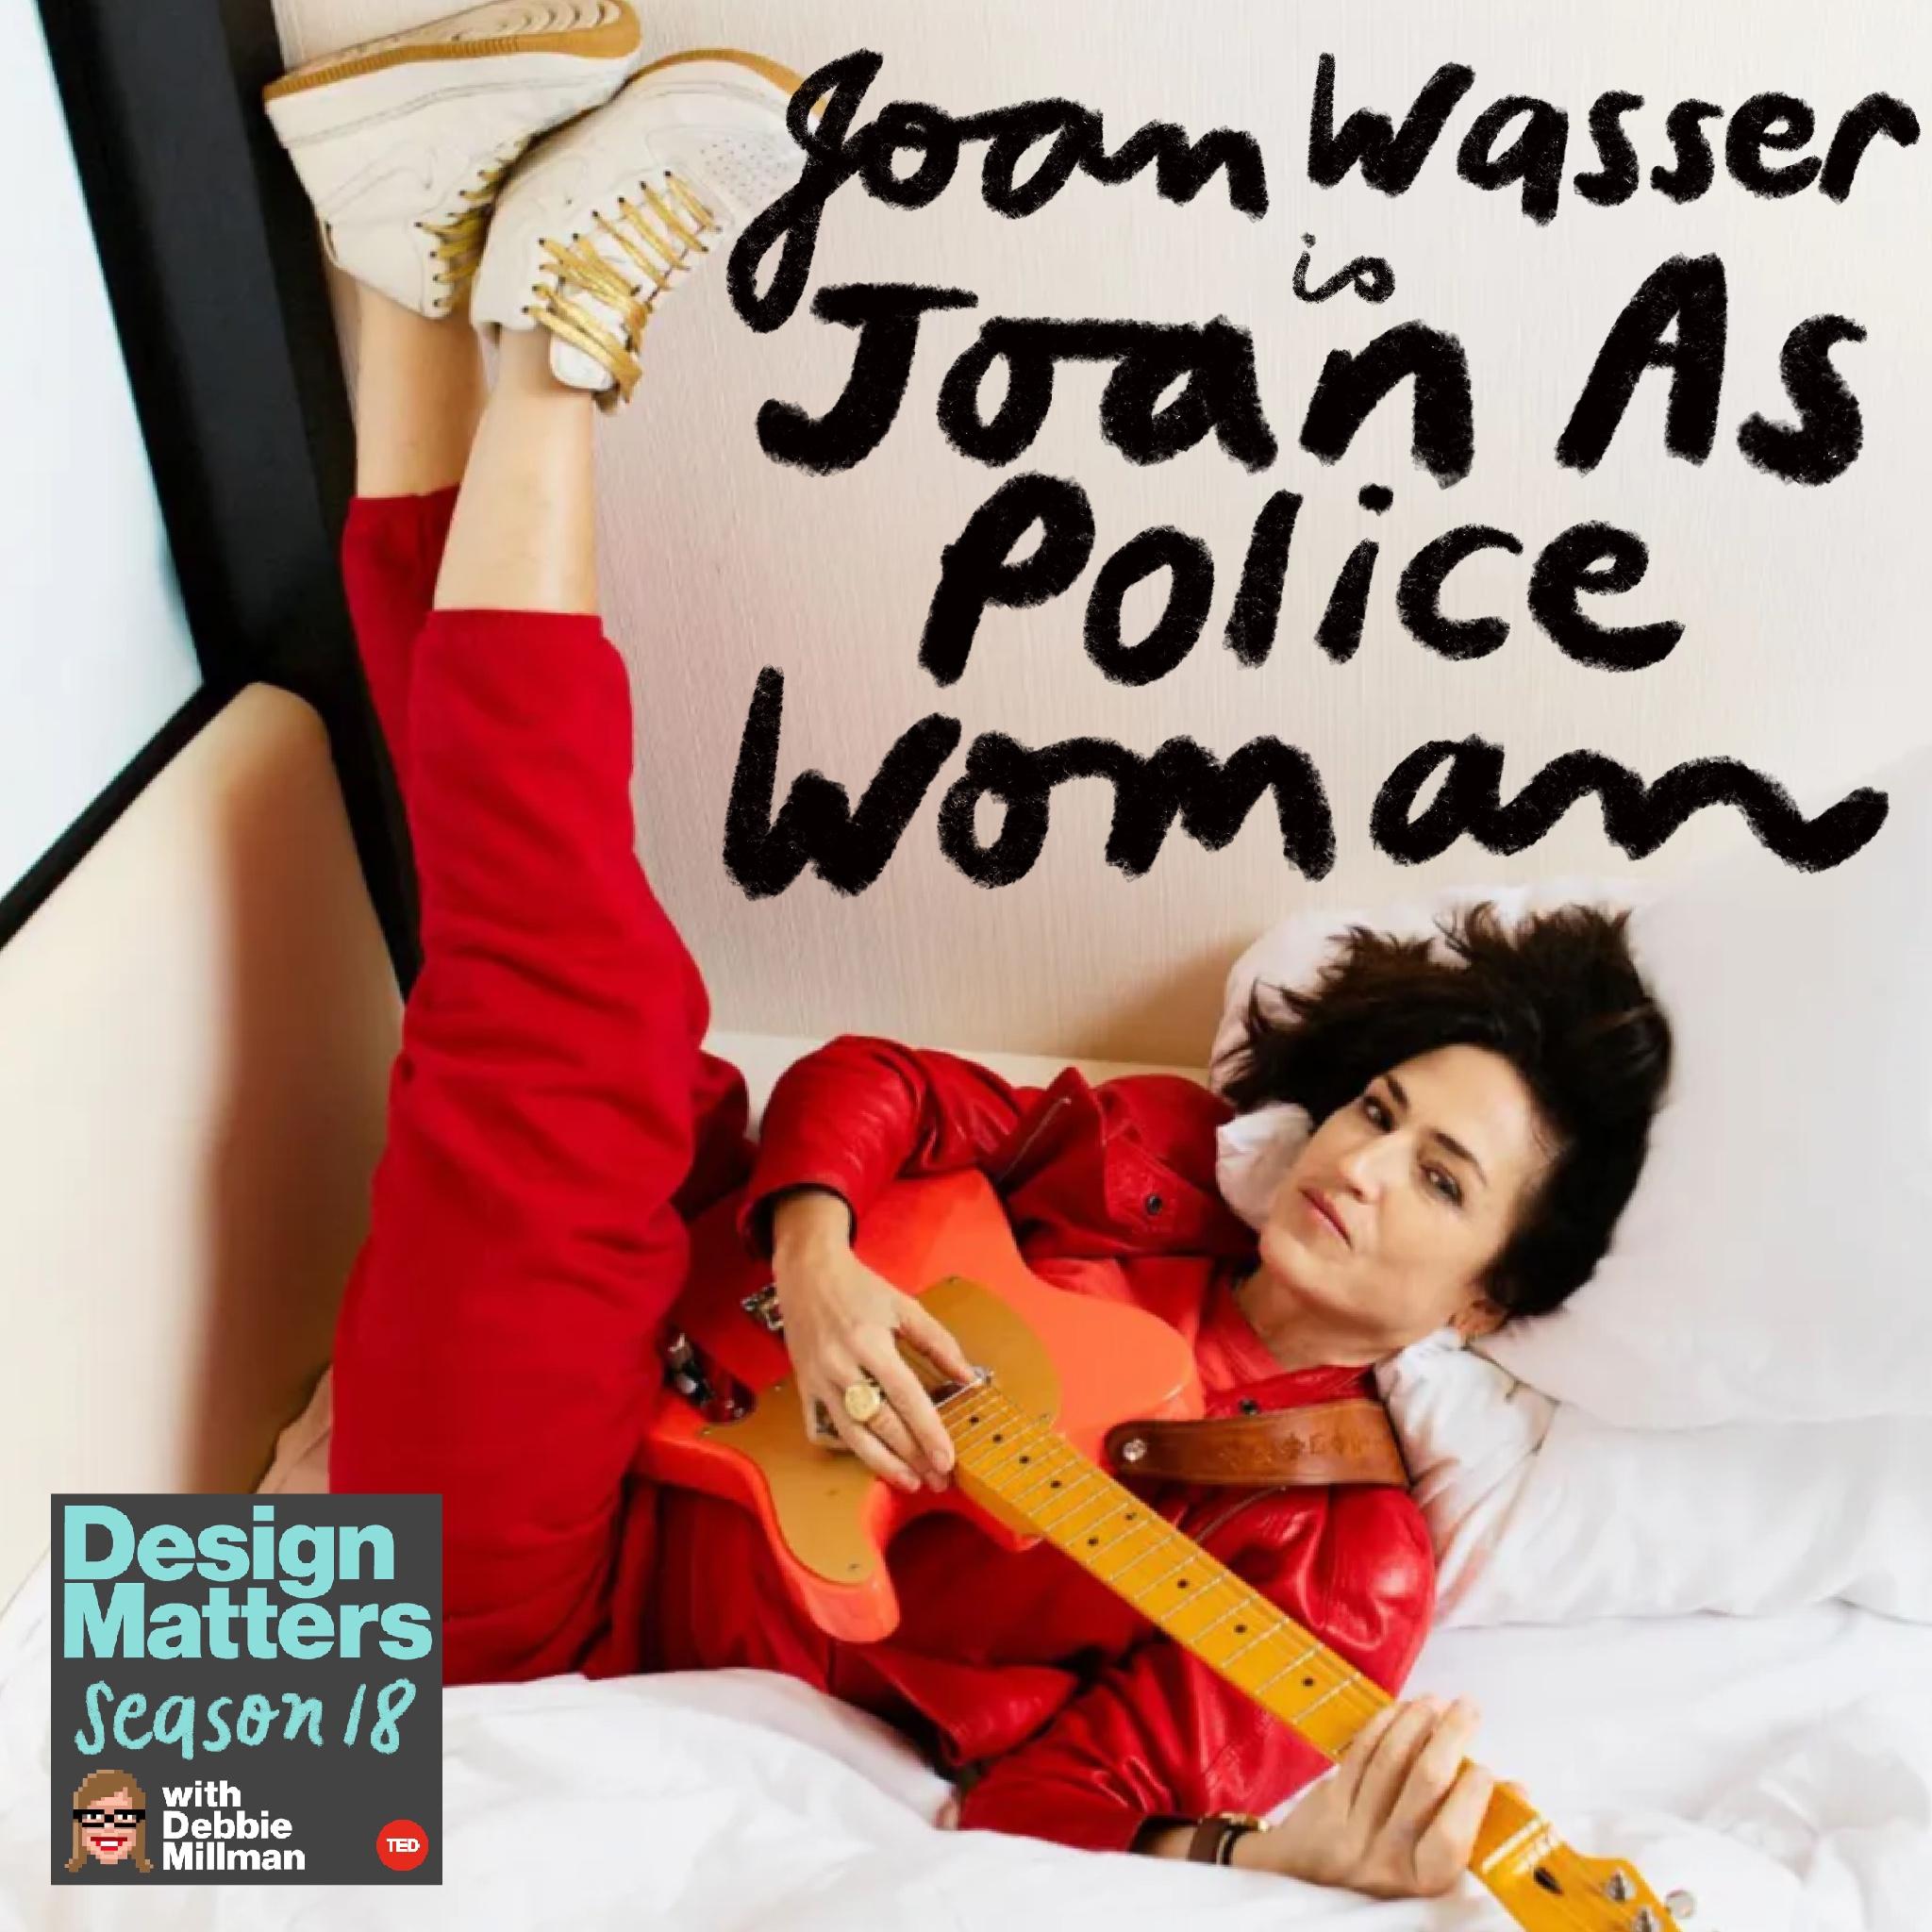 Thumbnail for "Joan As Police Woman".